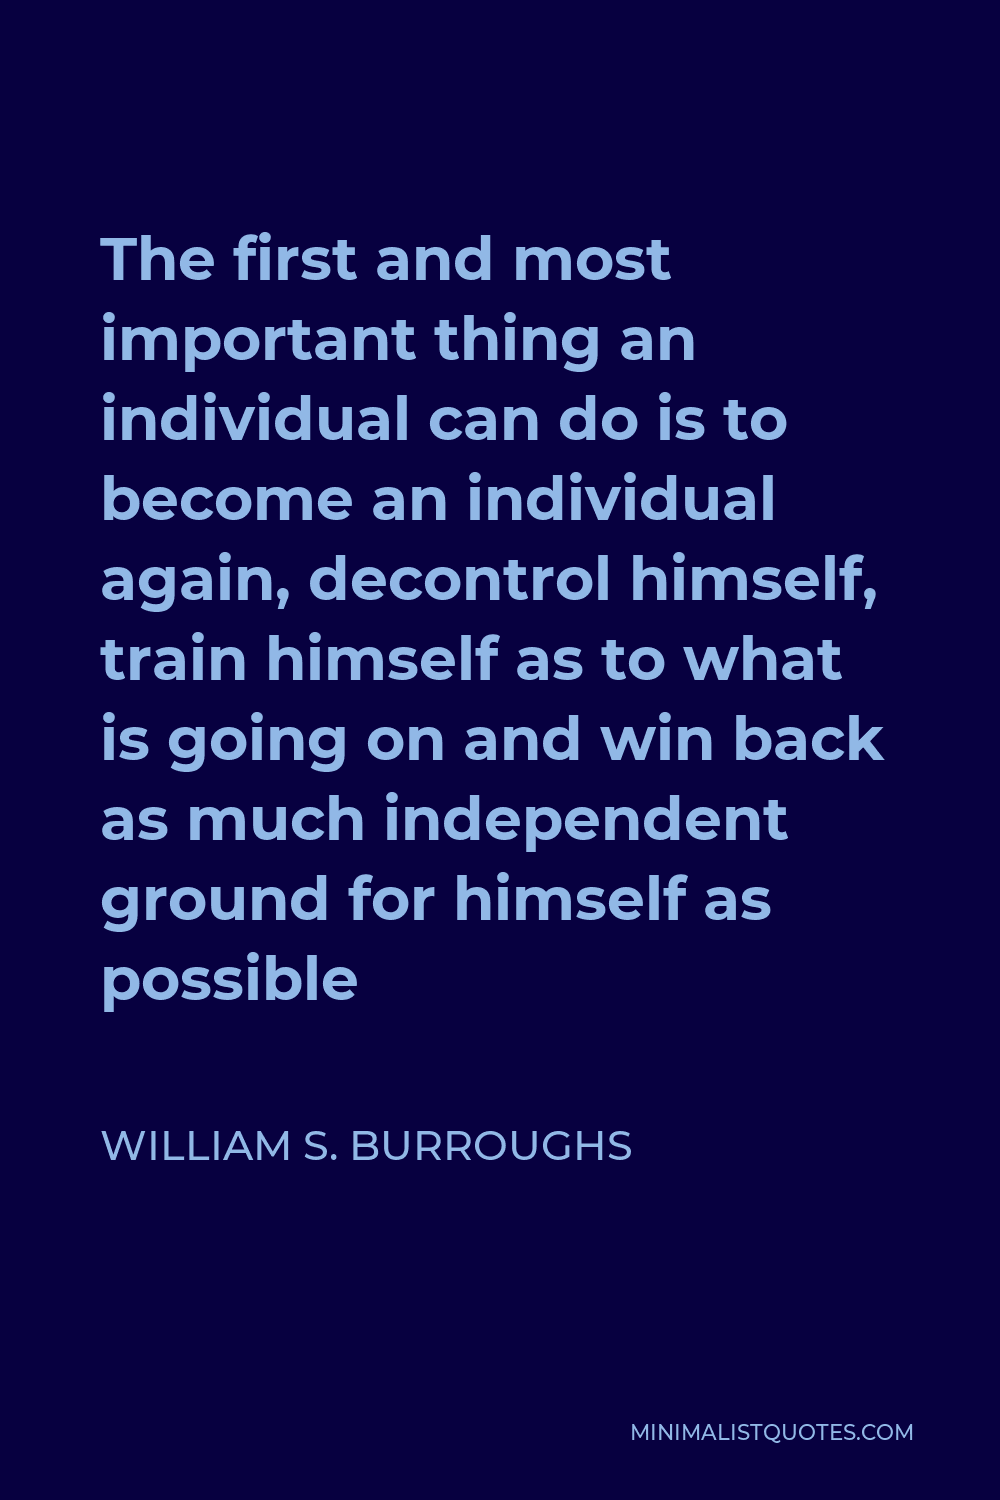 William S. Burroughs Quote - The first and most important thing an individual can do is to become an individual again, decontrol himself, train himself as to what is going on and win back as much independent ground for himself as possible